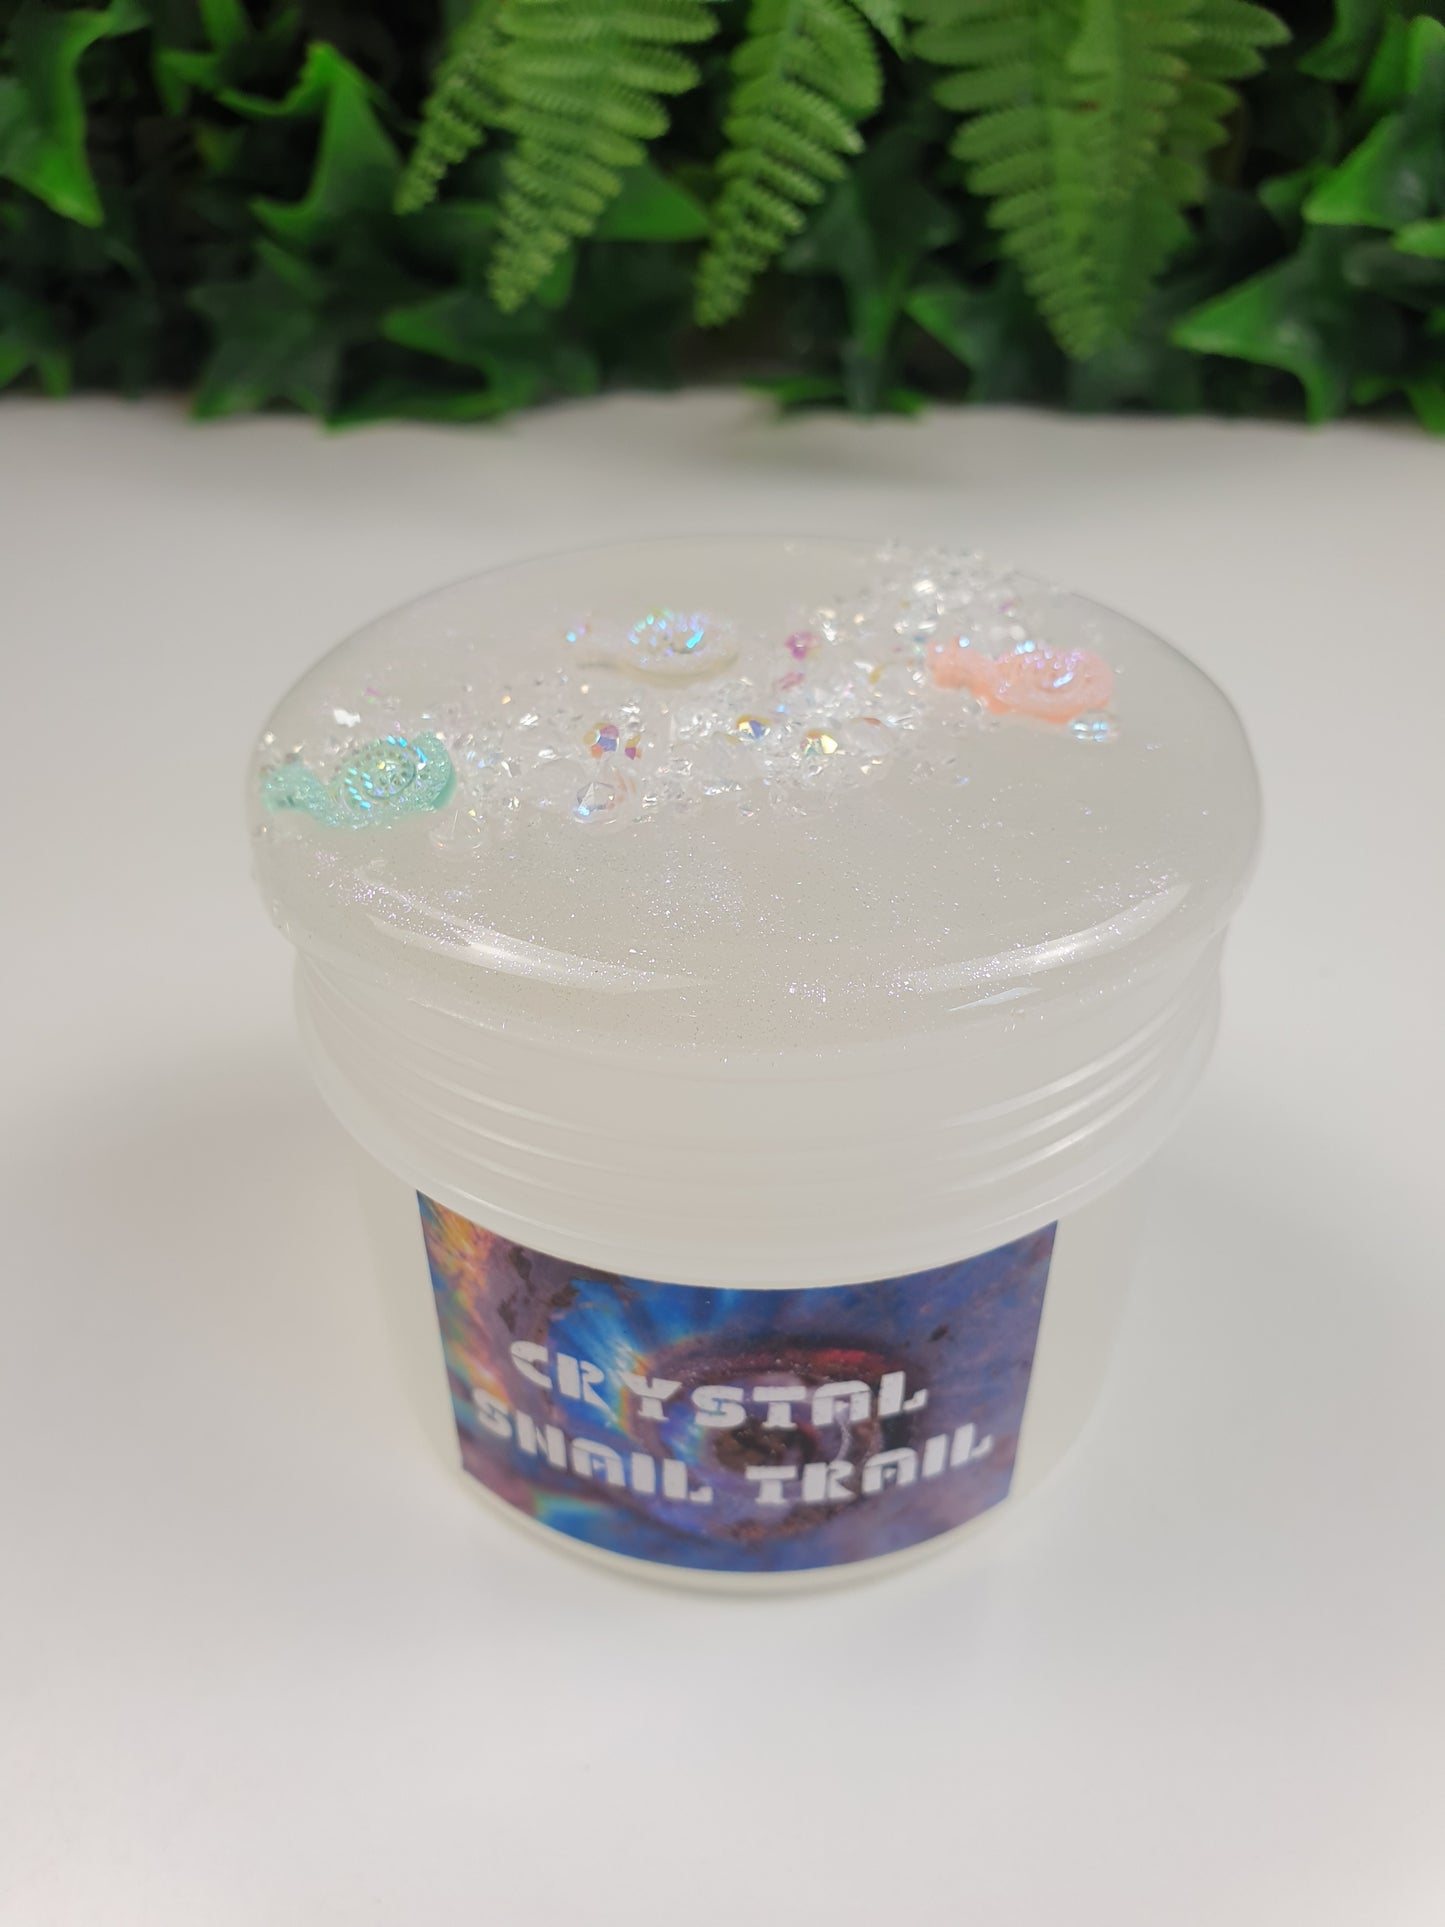 Clear Slime with Crystals Iridescent Sand and Glitter with Snail Charm Handmade in Australia